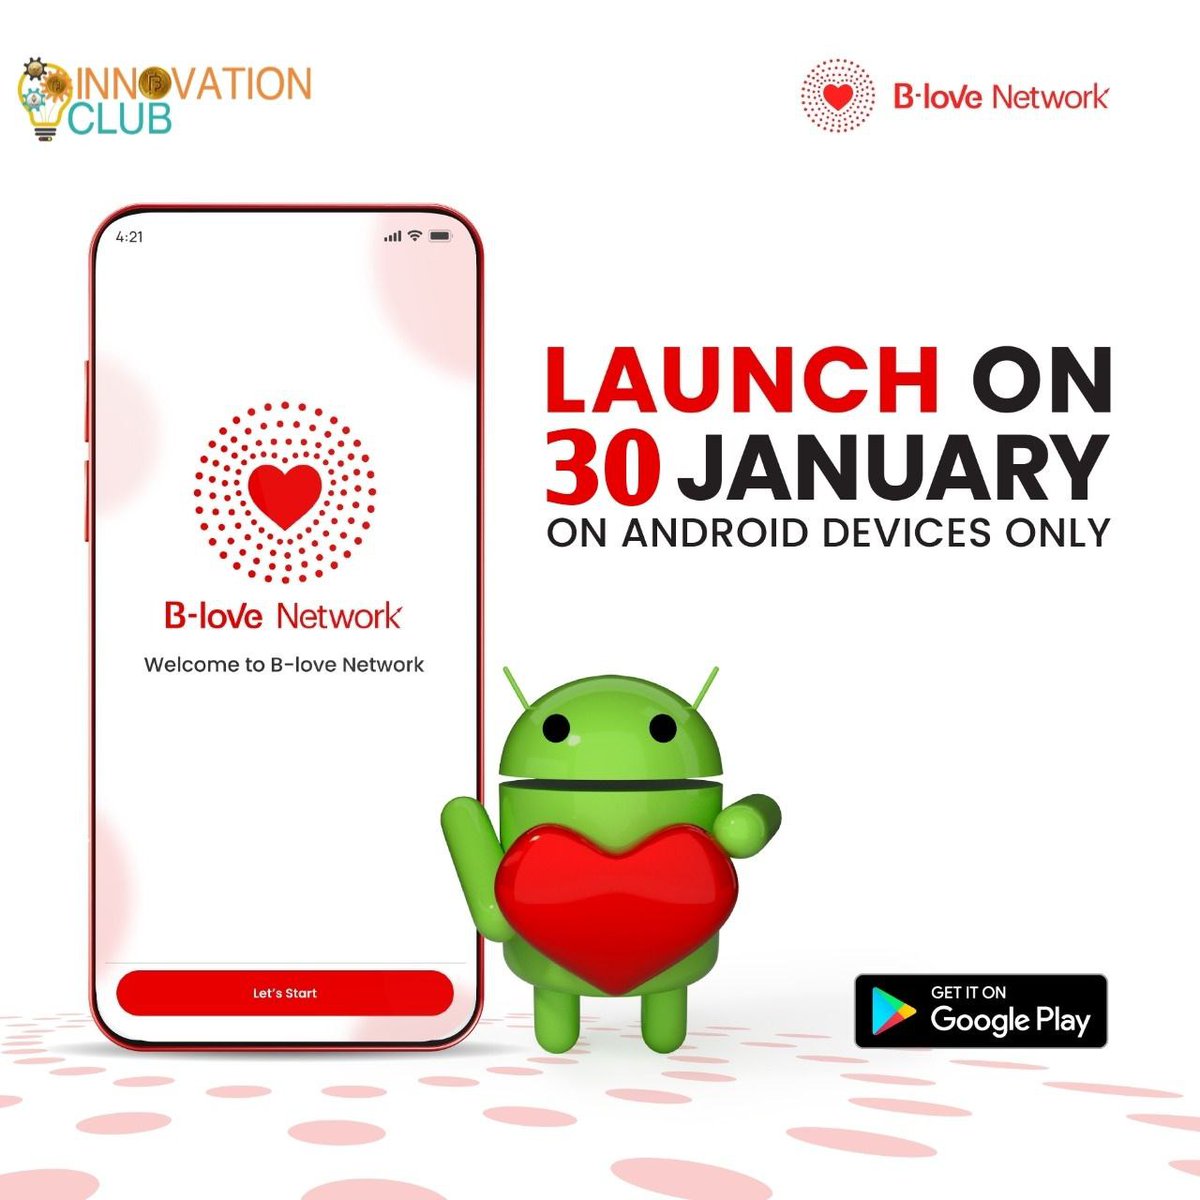 Get Ready #blovednetwork . Launch on 30th january.

#blove #innovationclub #bficoin #xchangeon #dexa #AppreCryptoTalks